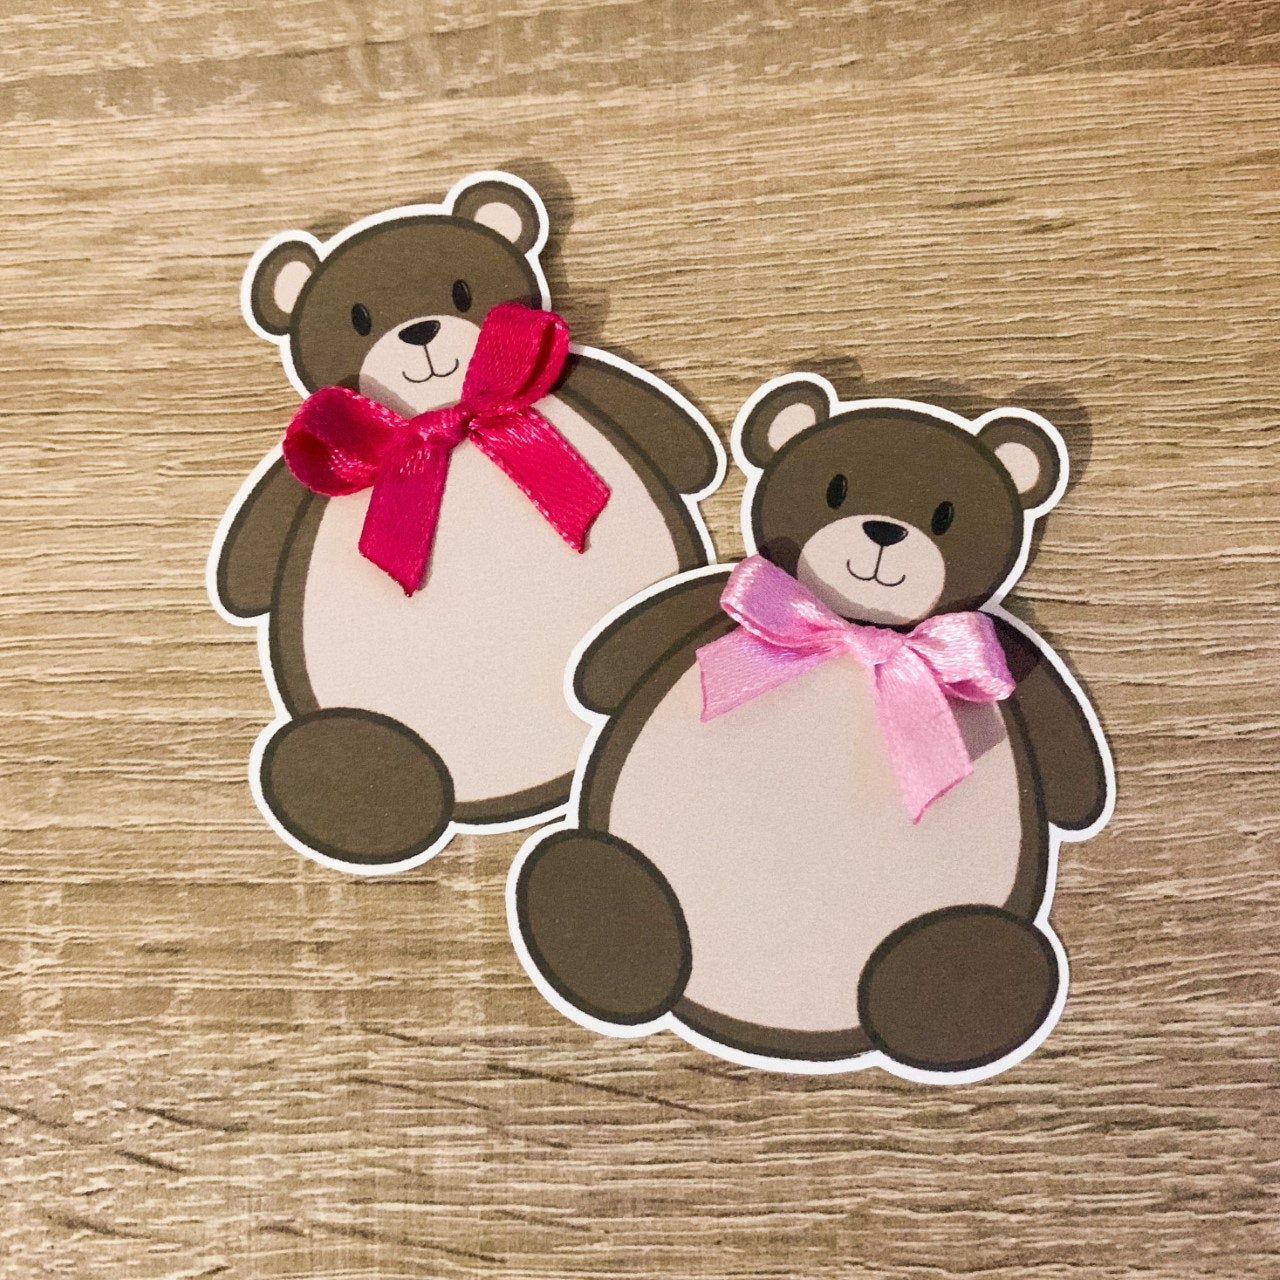 Lovely bear Die Cut with bow